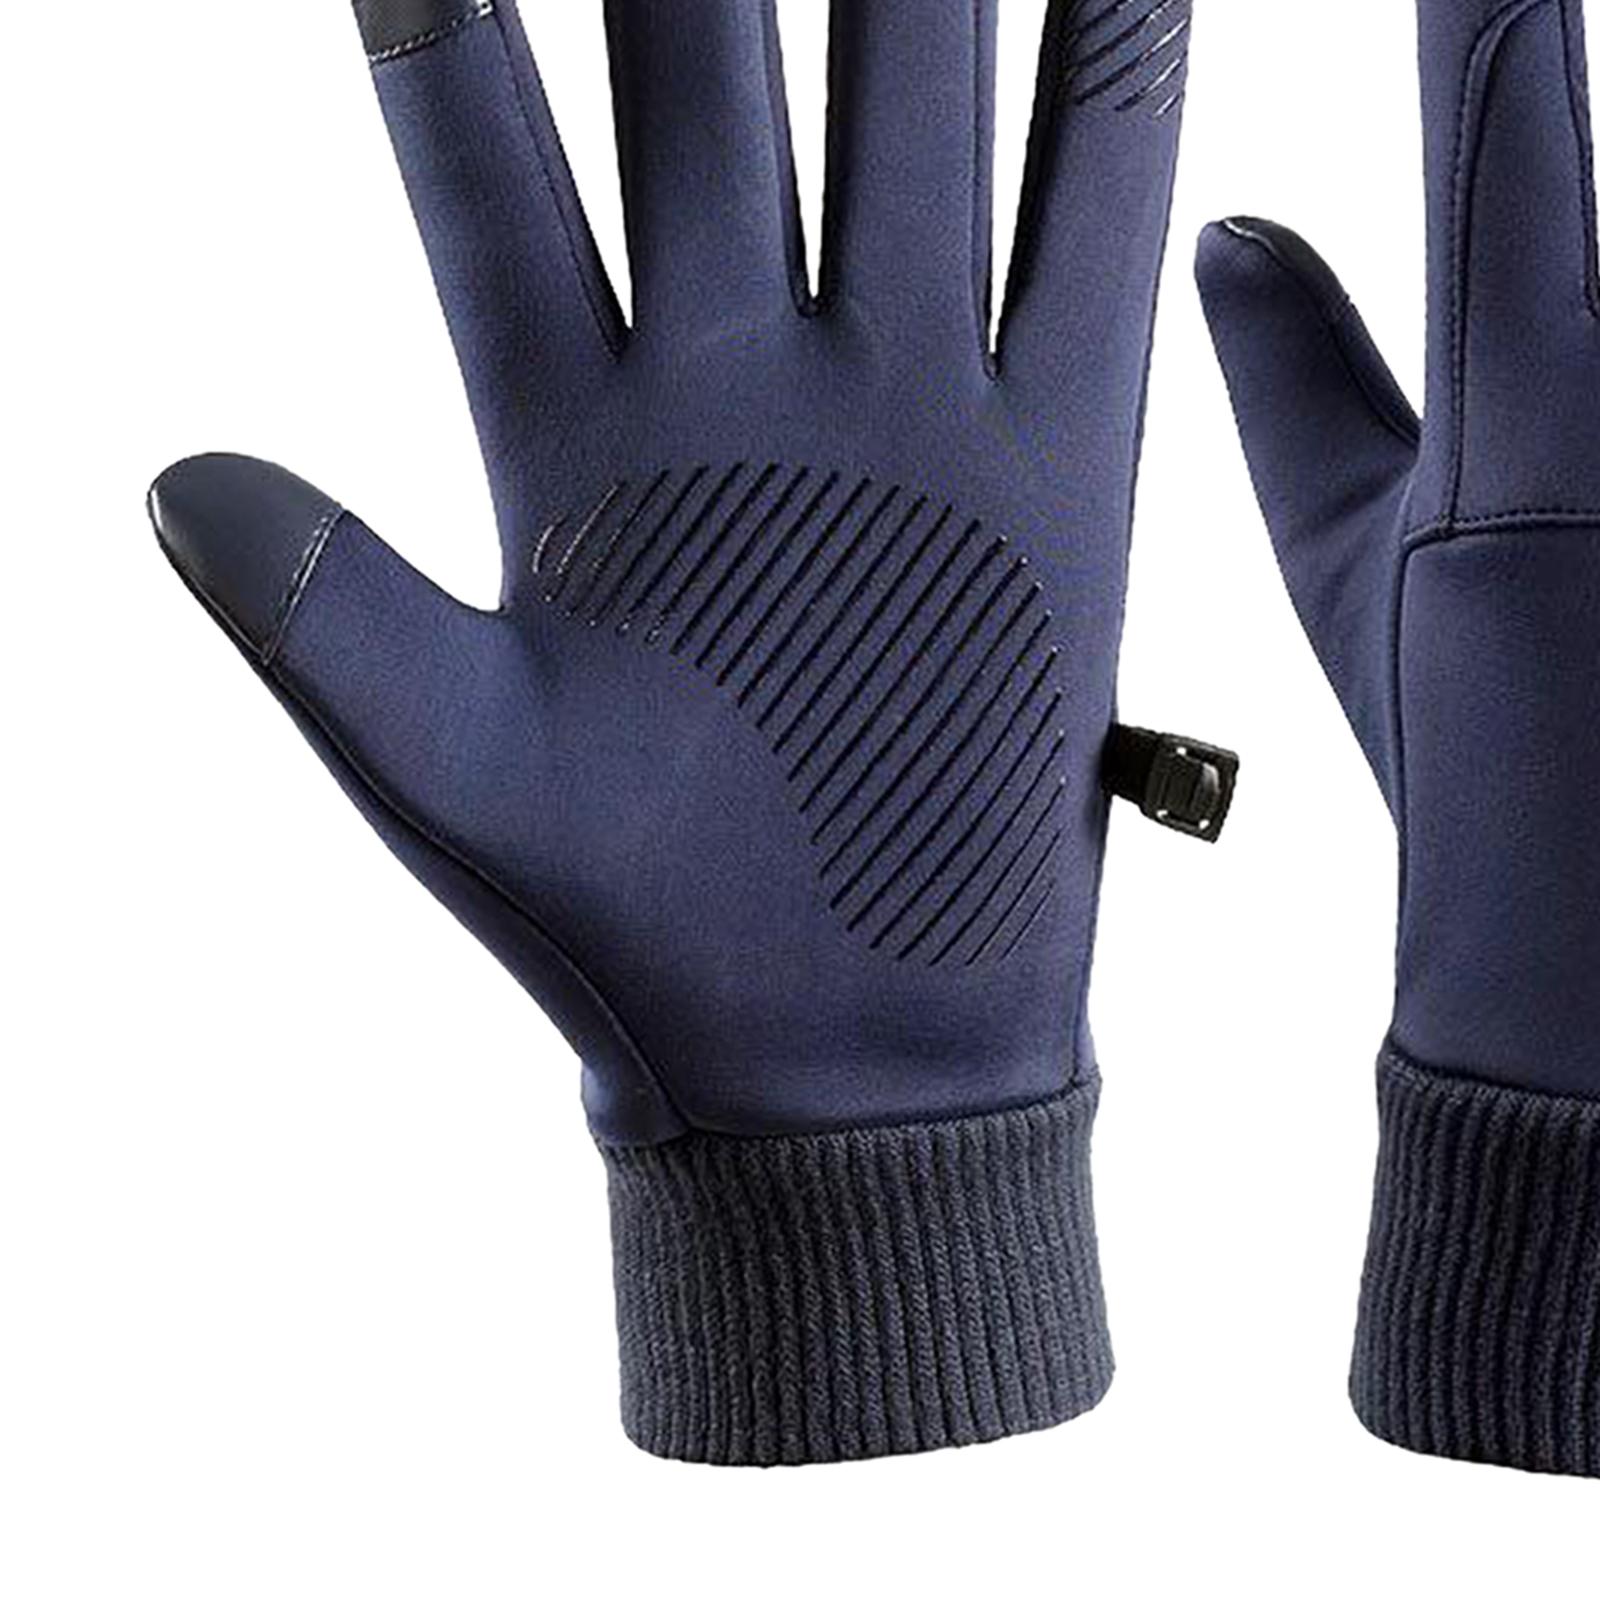 Winter Outdoor Cycling Hiking Sports Gloves Touch Screen XL Navy Blue K147